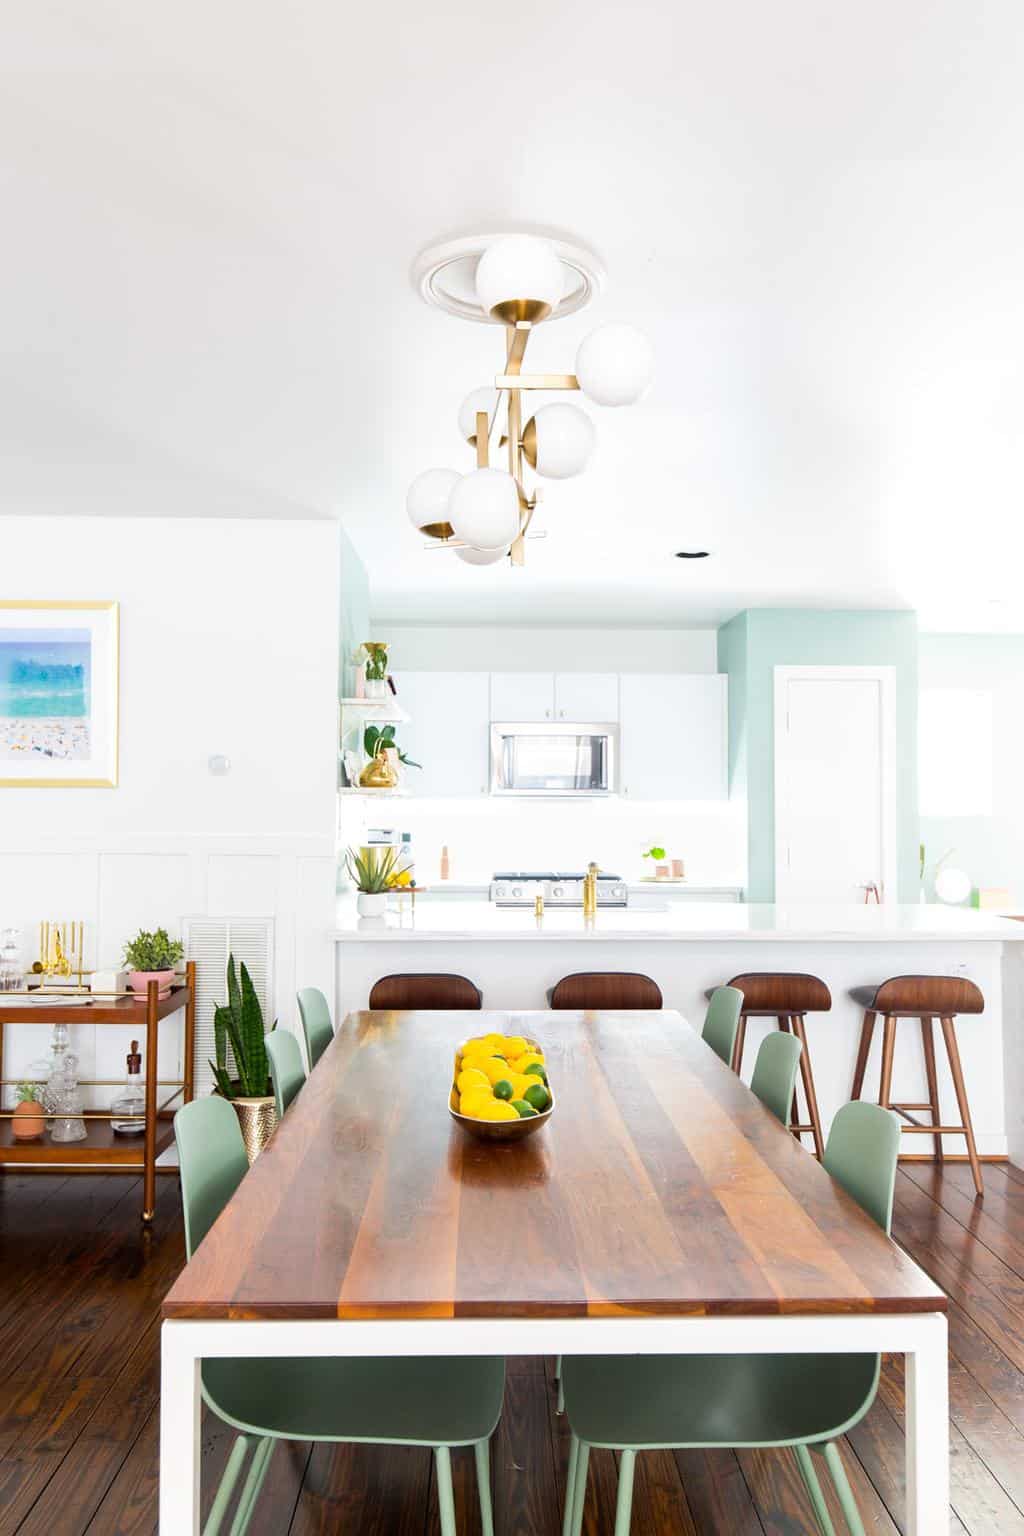 Sugar & Cloth Casa: Our Kitchen Makeover Reveal! by top Houston lifestyle blogger Ashley Rose of Sugar & Cloth #design #homedecor #interiors #kitchen #makeover